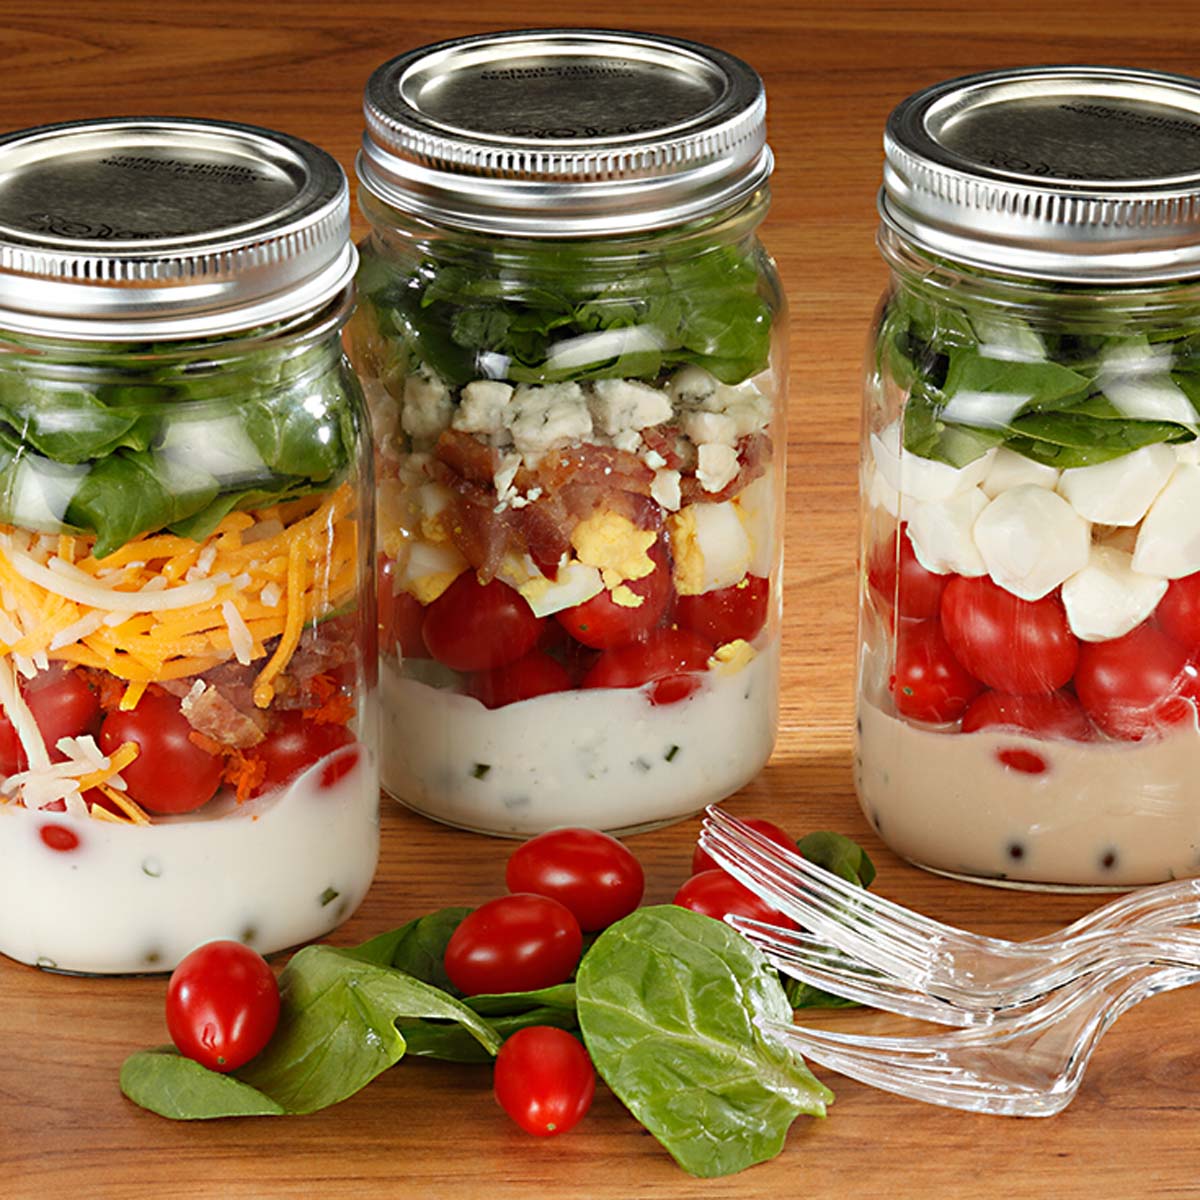 salad-in-a-jar-recipe-dairy-discovery-zone